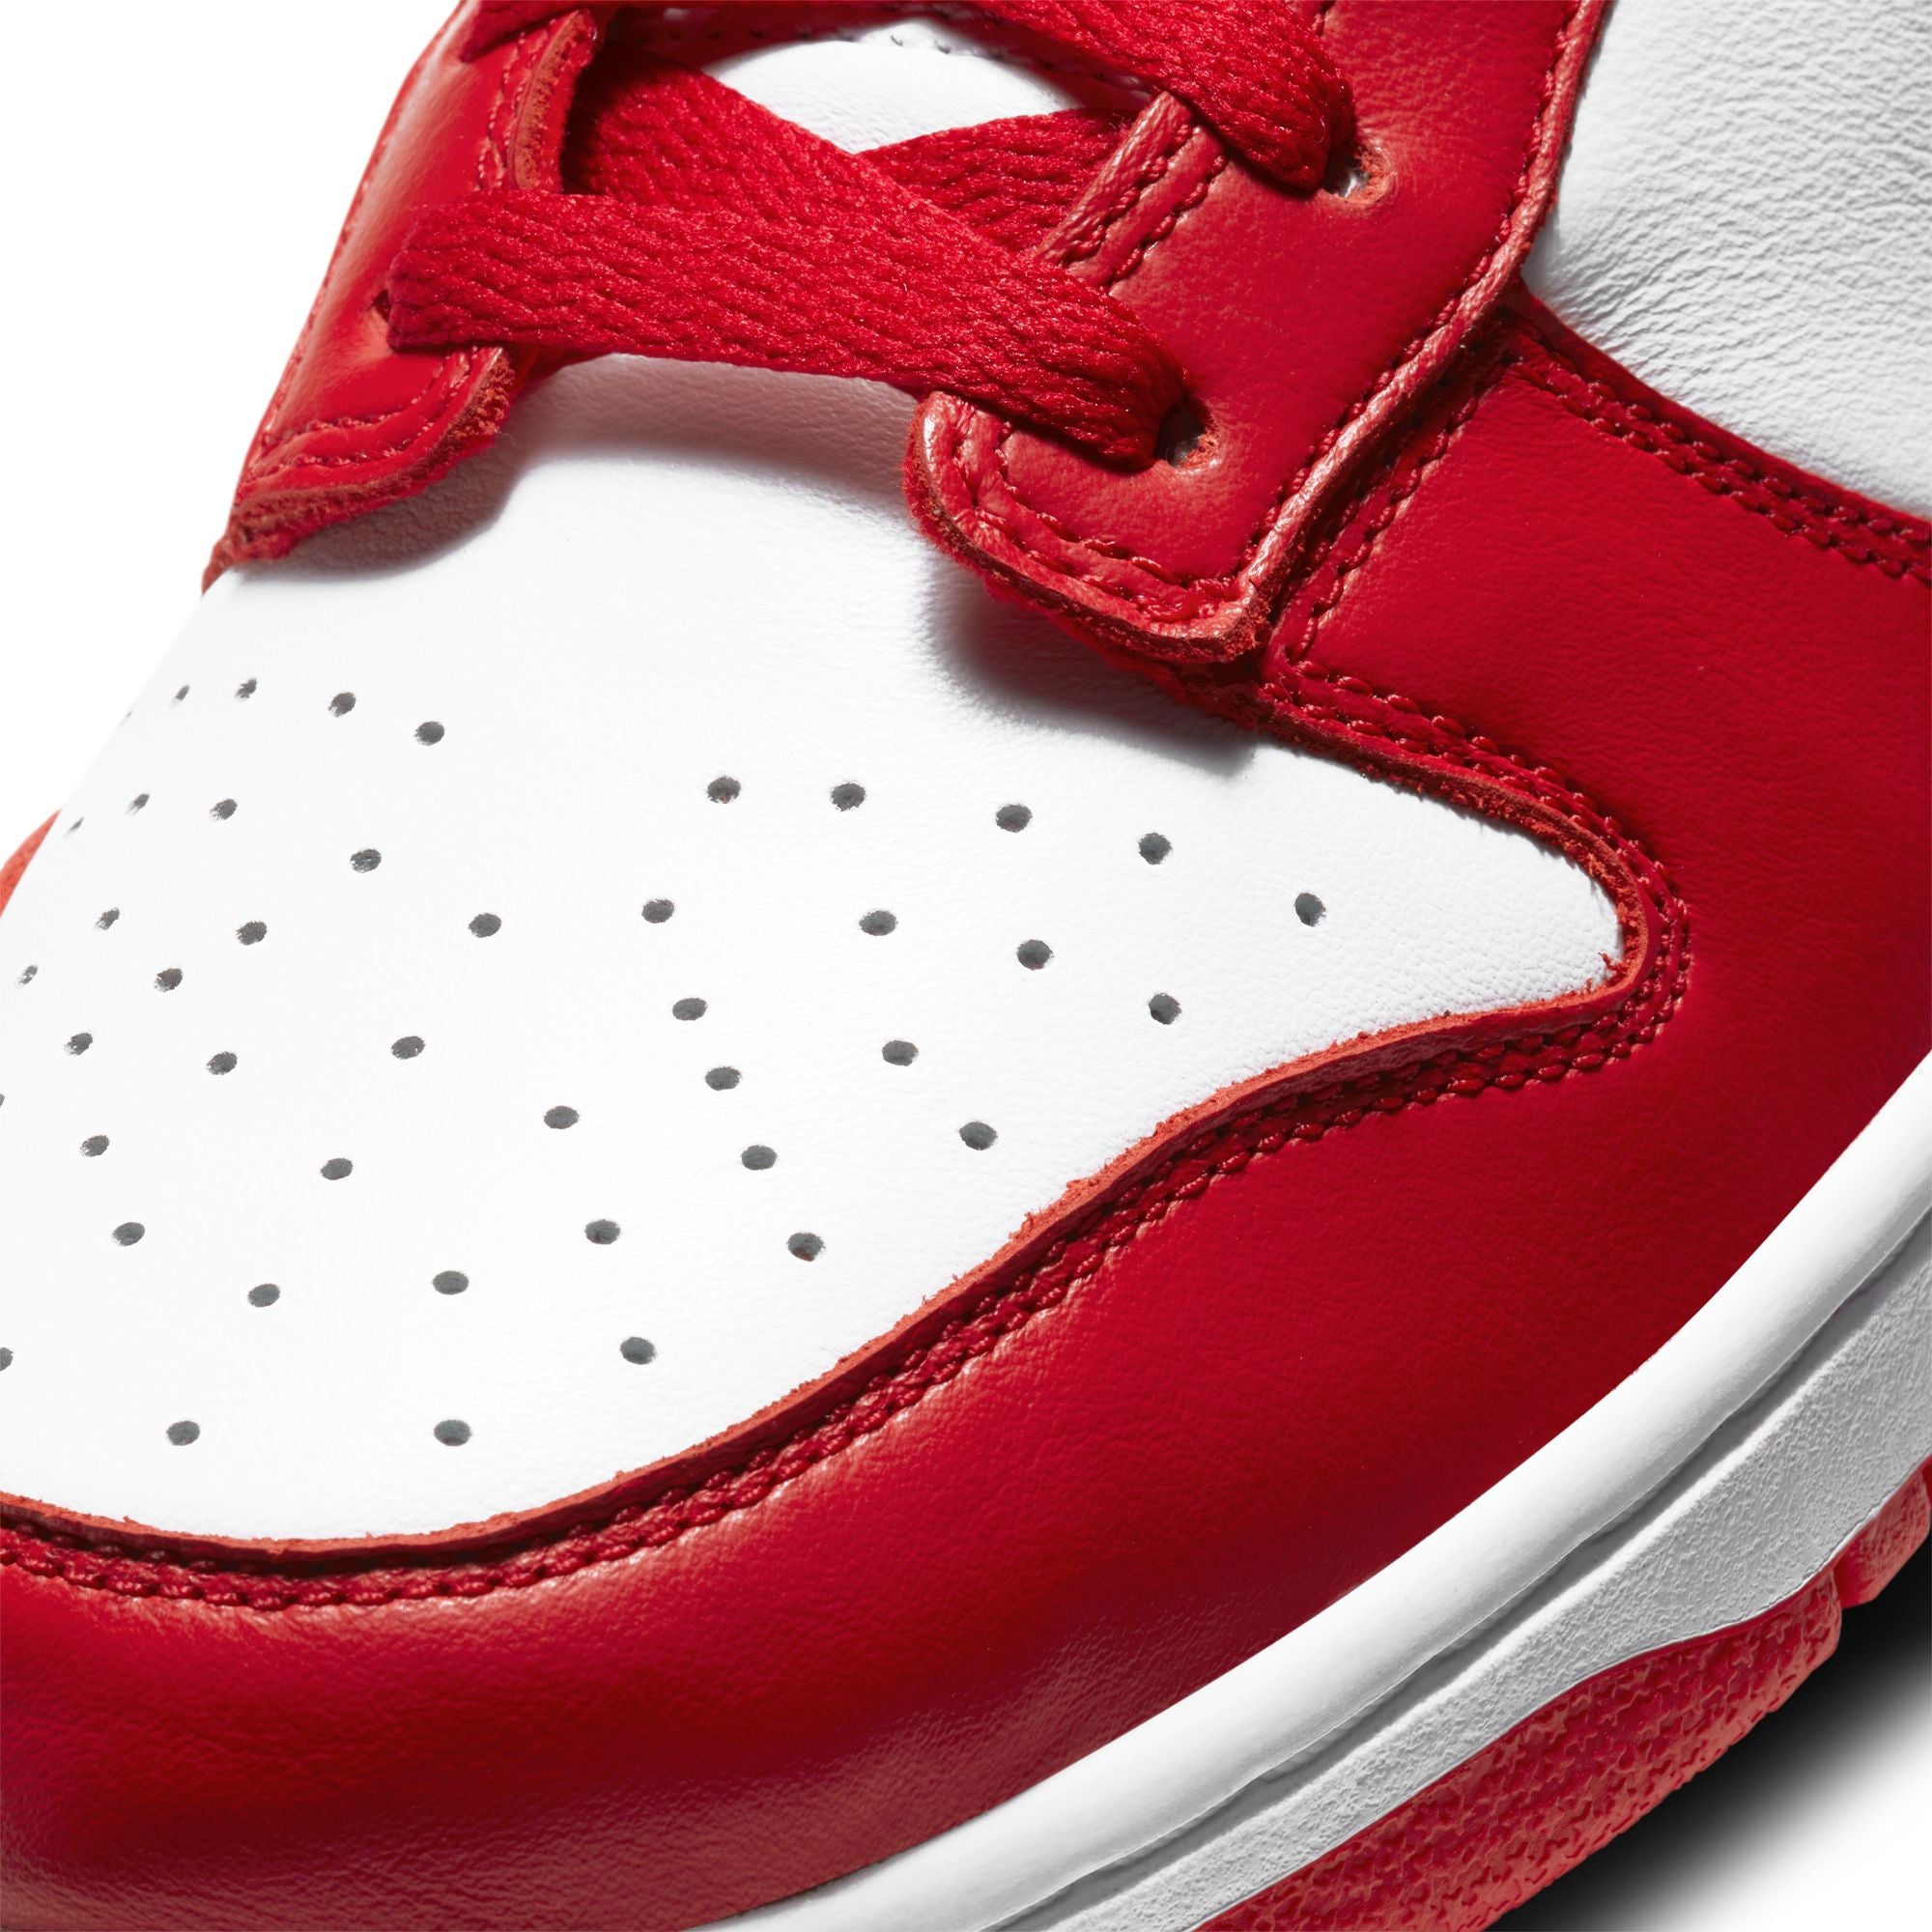 NIKE DUNK LOW SP "WHITE/UNIVERSITY RED"